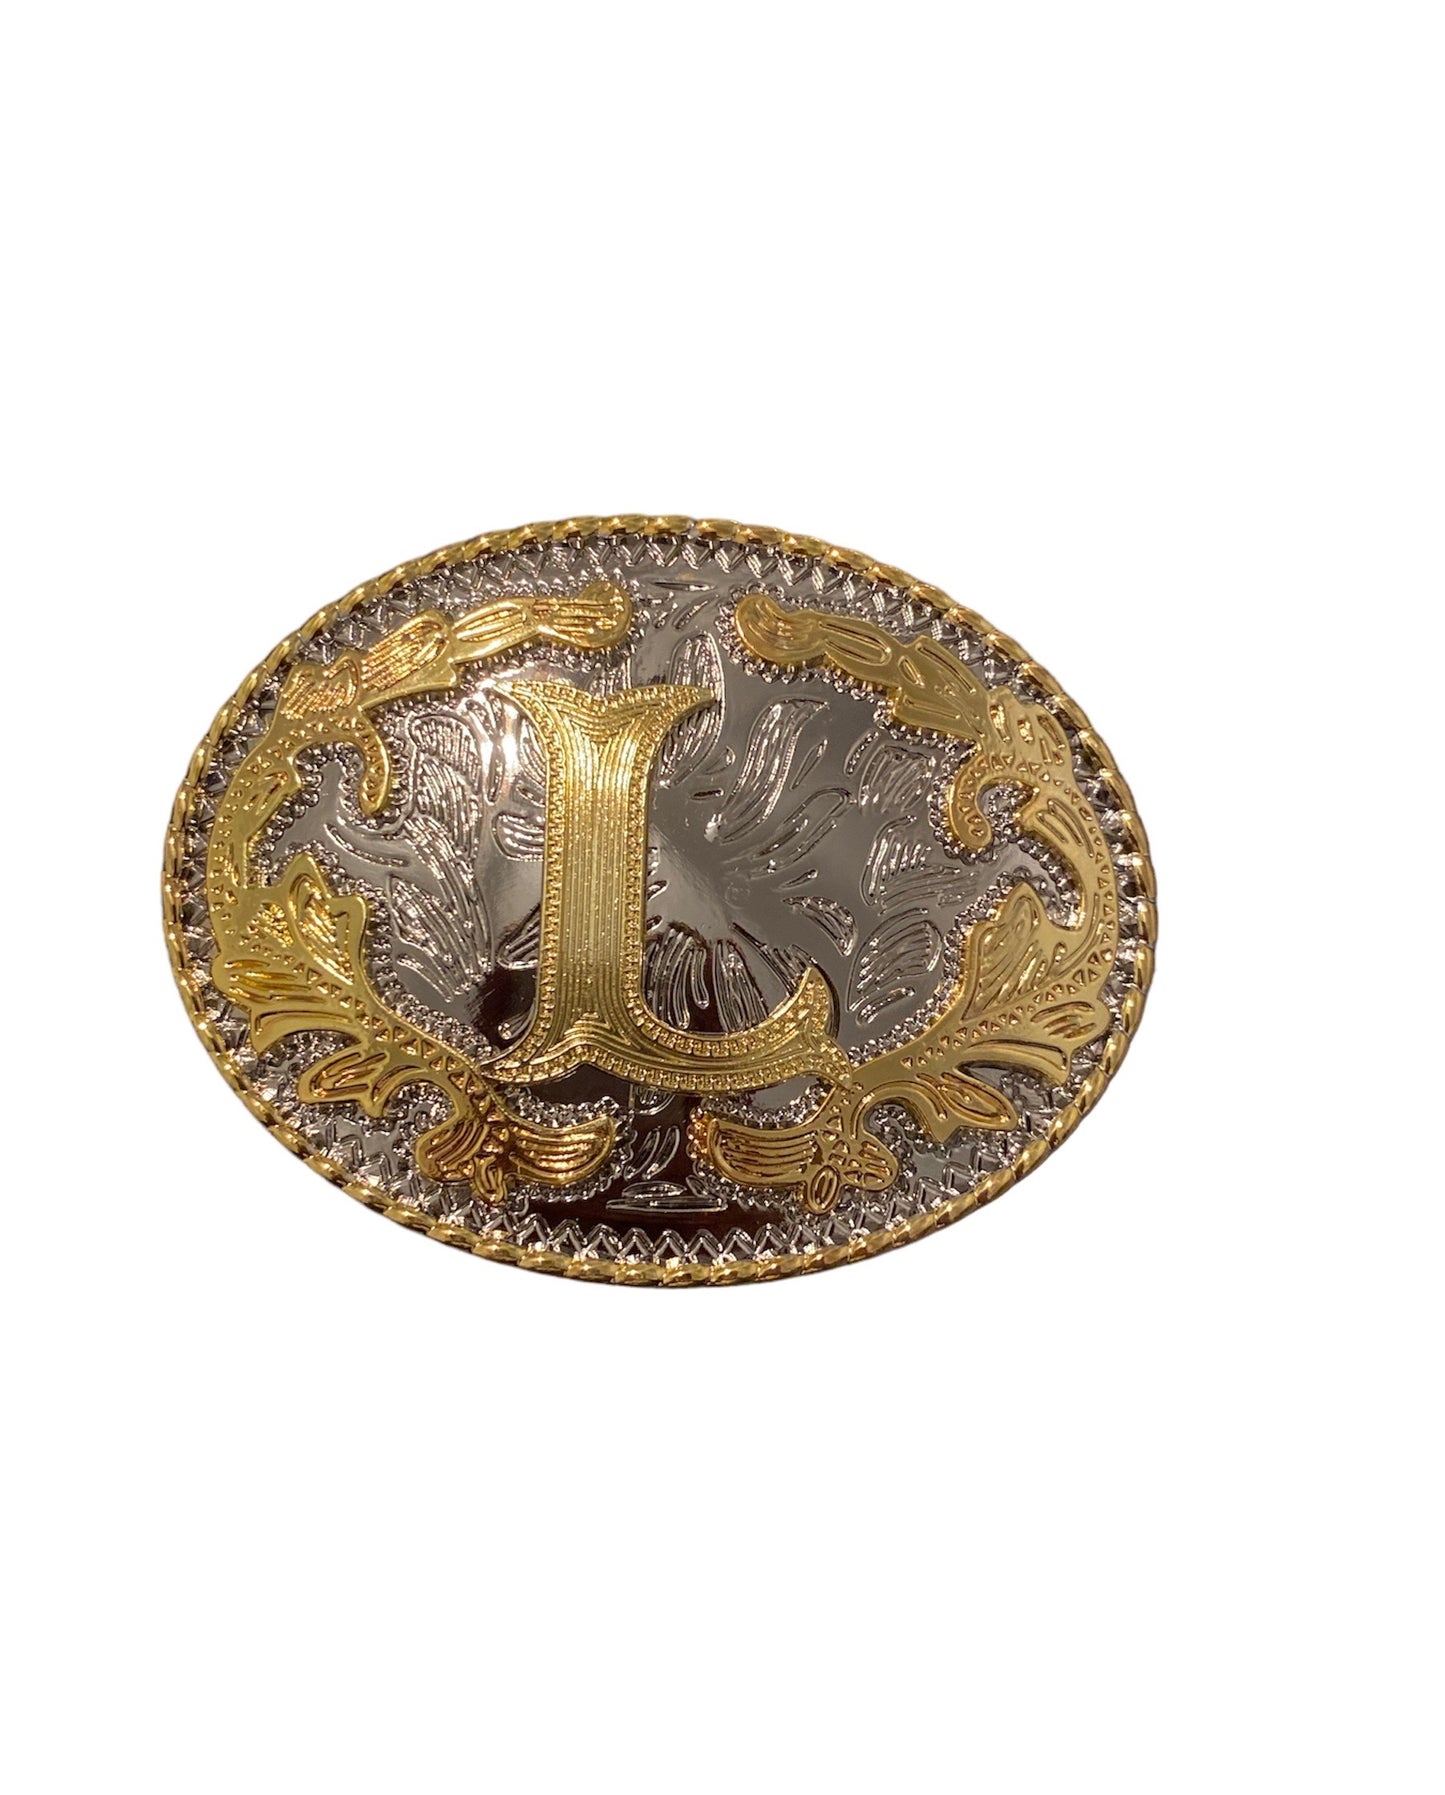 Initial Letter "L" Cowboy Rodeo Western Large Gold Tone Belt Buckle